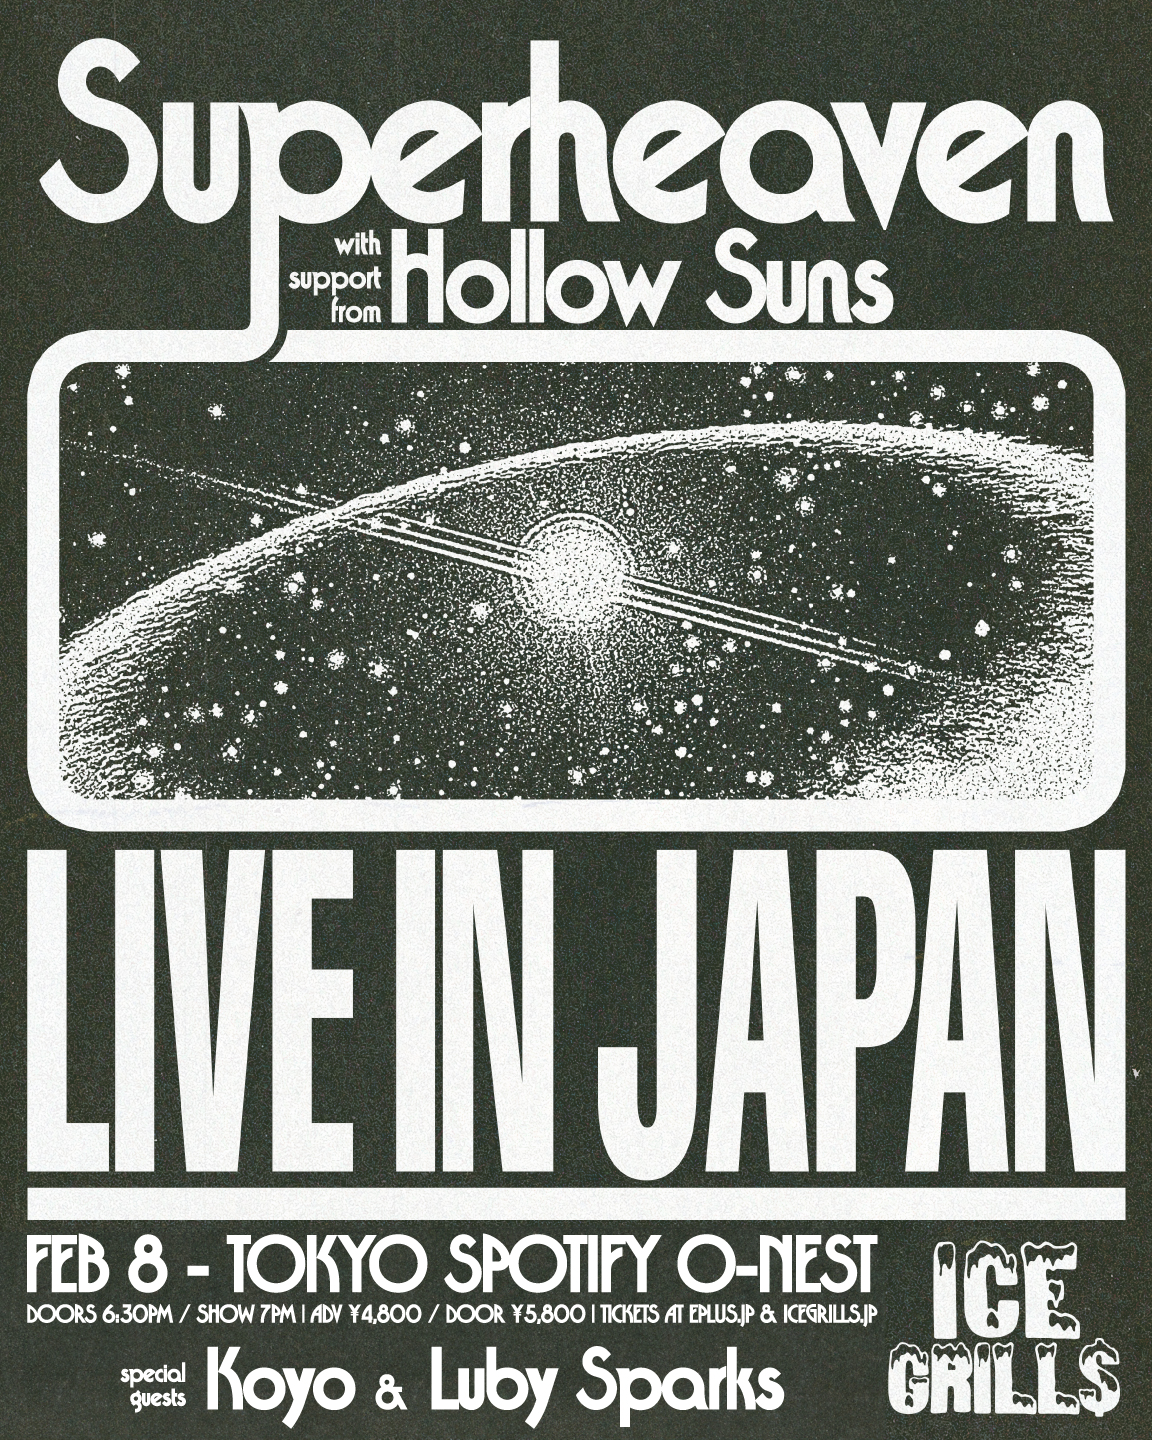 Koyo playing Superheaven with Hollow Suns Live in Tokyo on February 8th